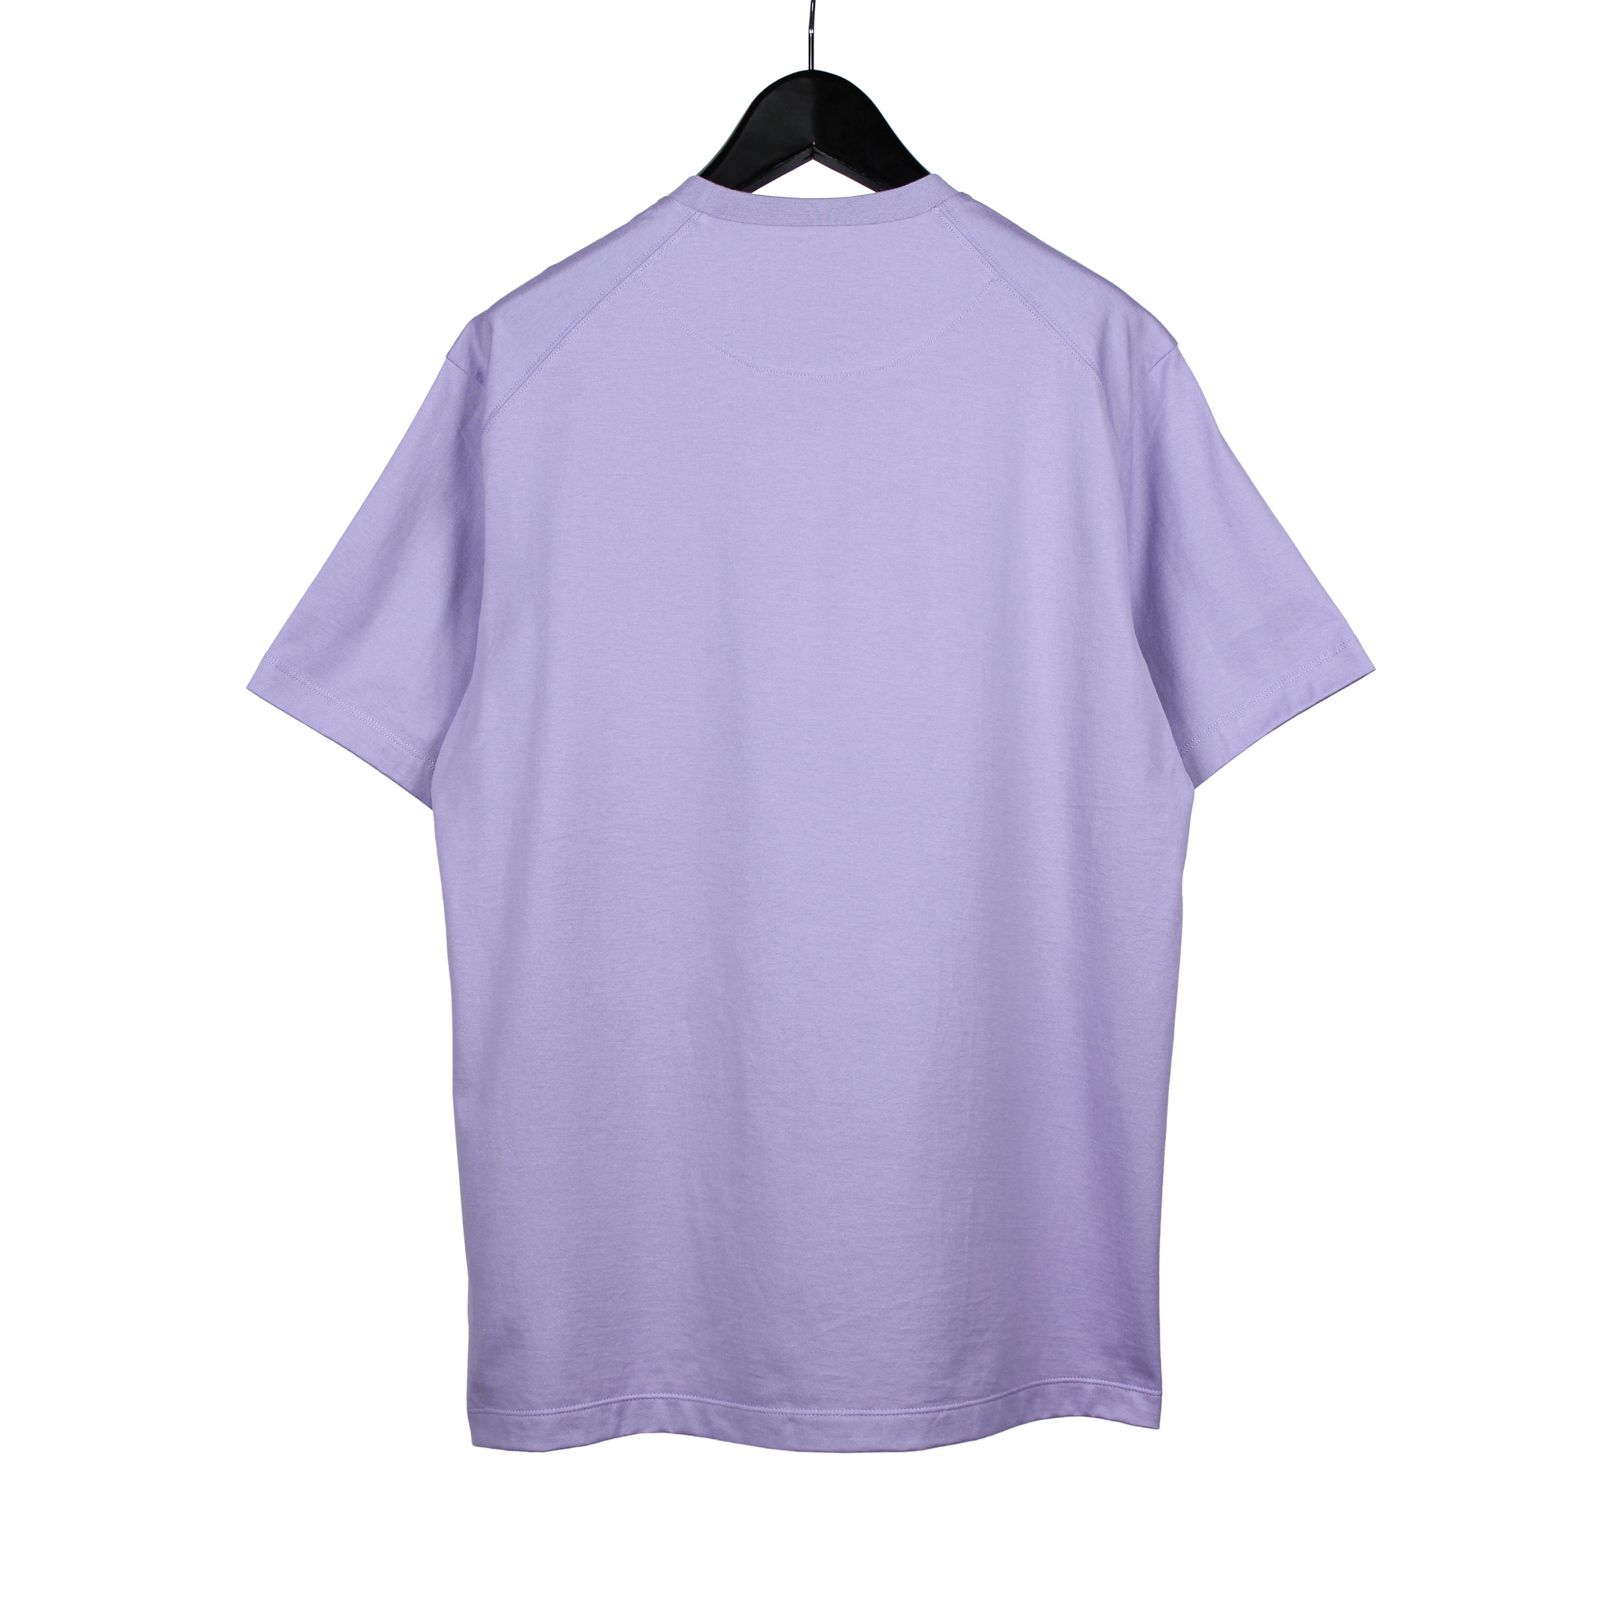 Y-3 - M CLASSIC CHEST LOGO SS TEE / GV4115-ACCS21